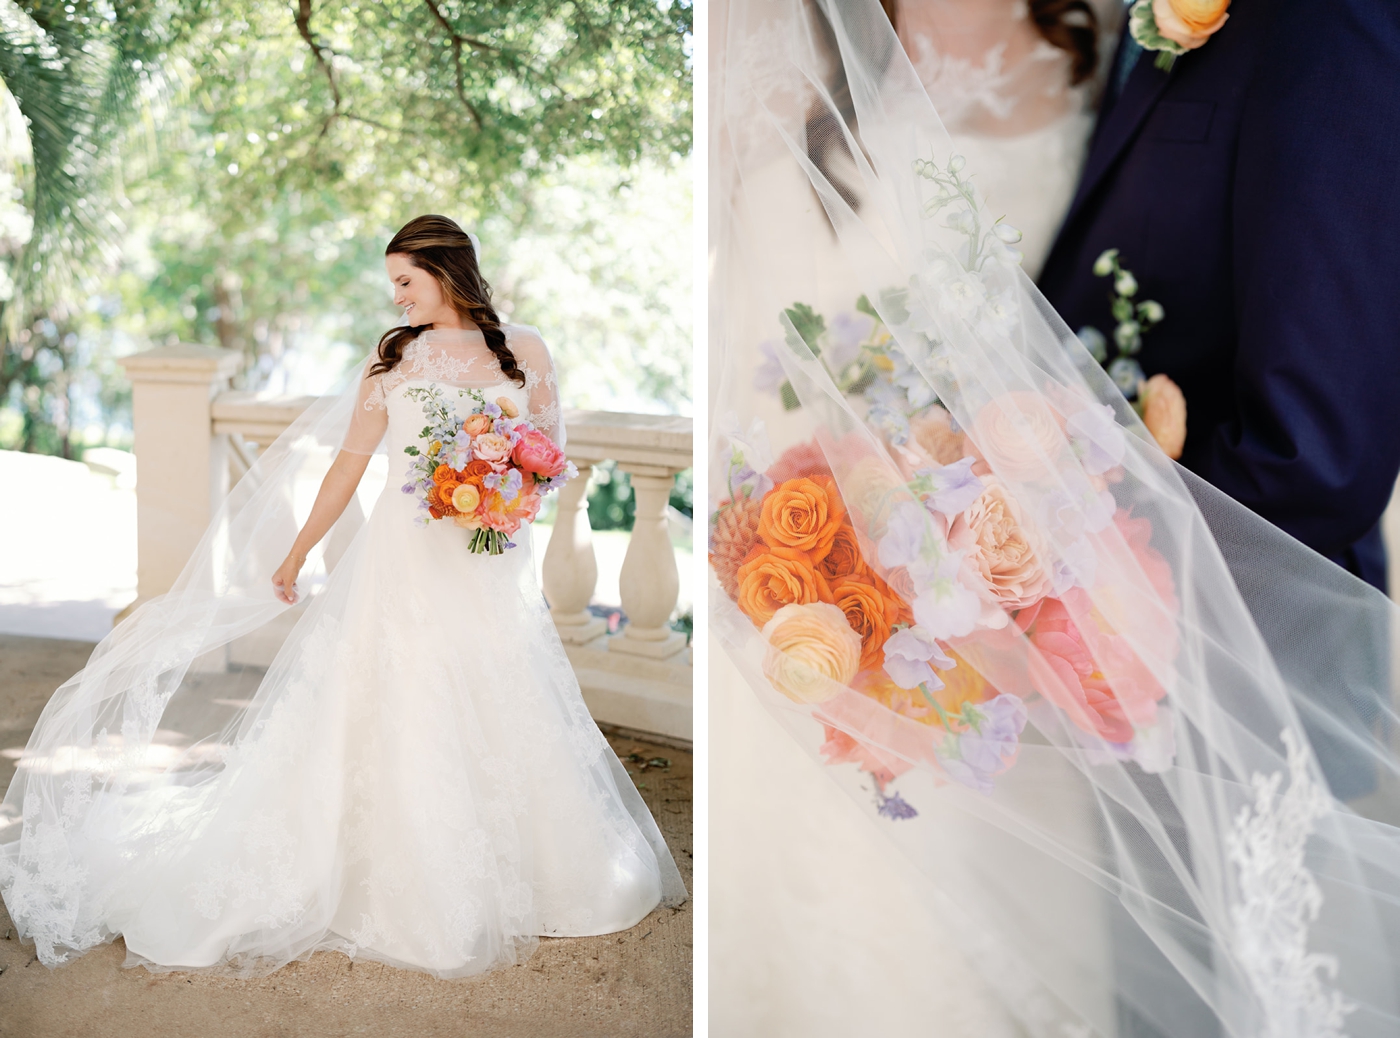 Bride in a Vera Wang gown holding a bouquet of pink, orange, and lavender flowers